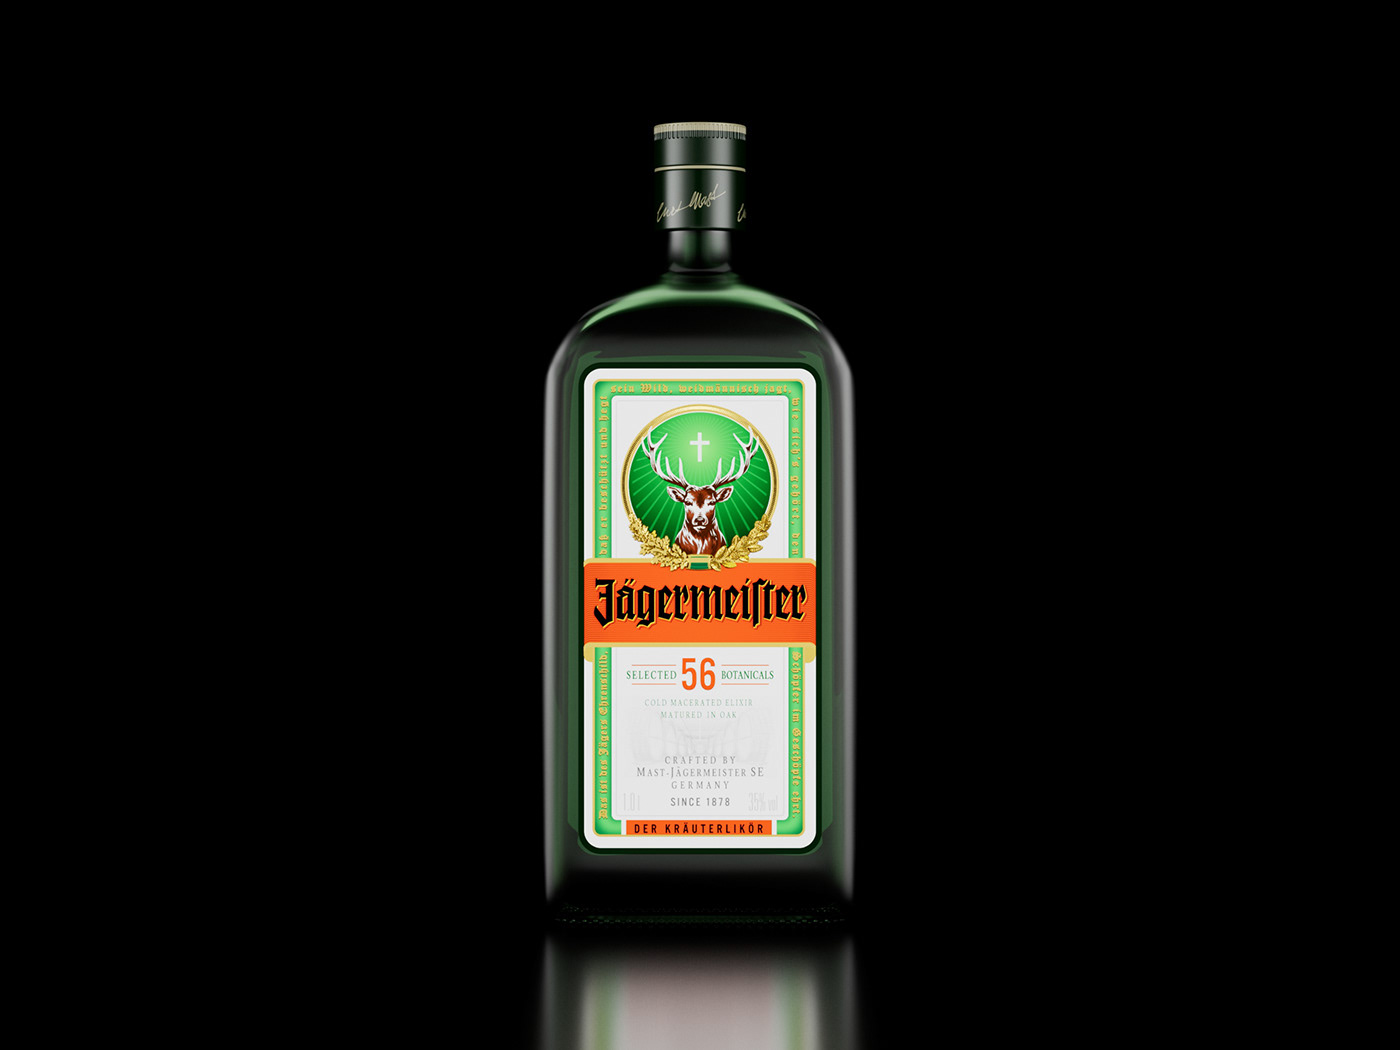 cinema 4d 3d product CGI redshift 3d design Jagermeister alcohol Advertising  product design  visualization